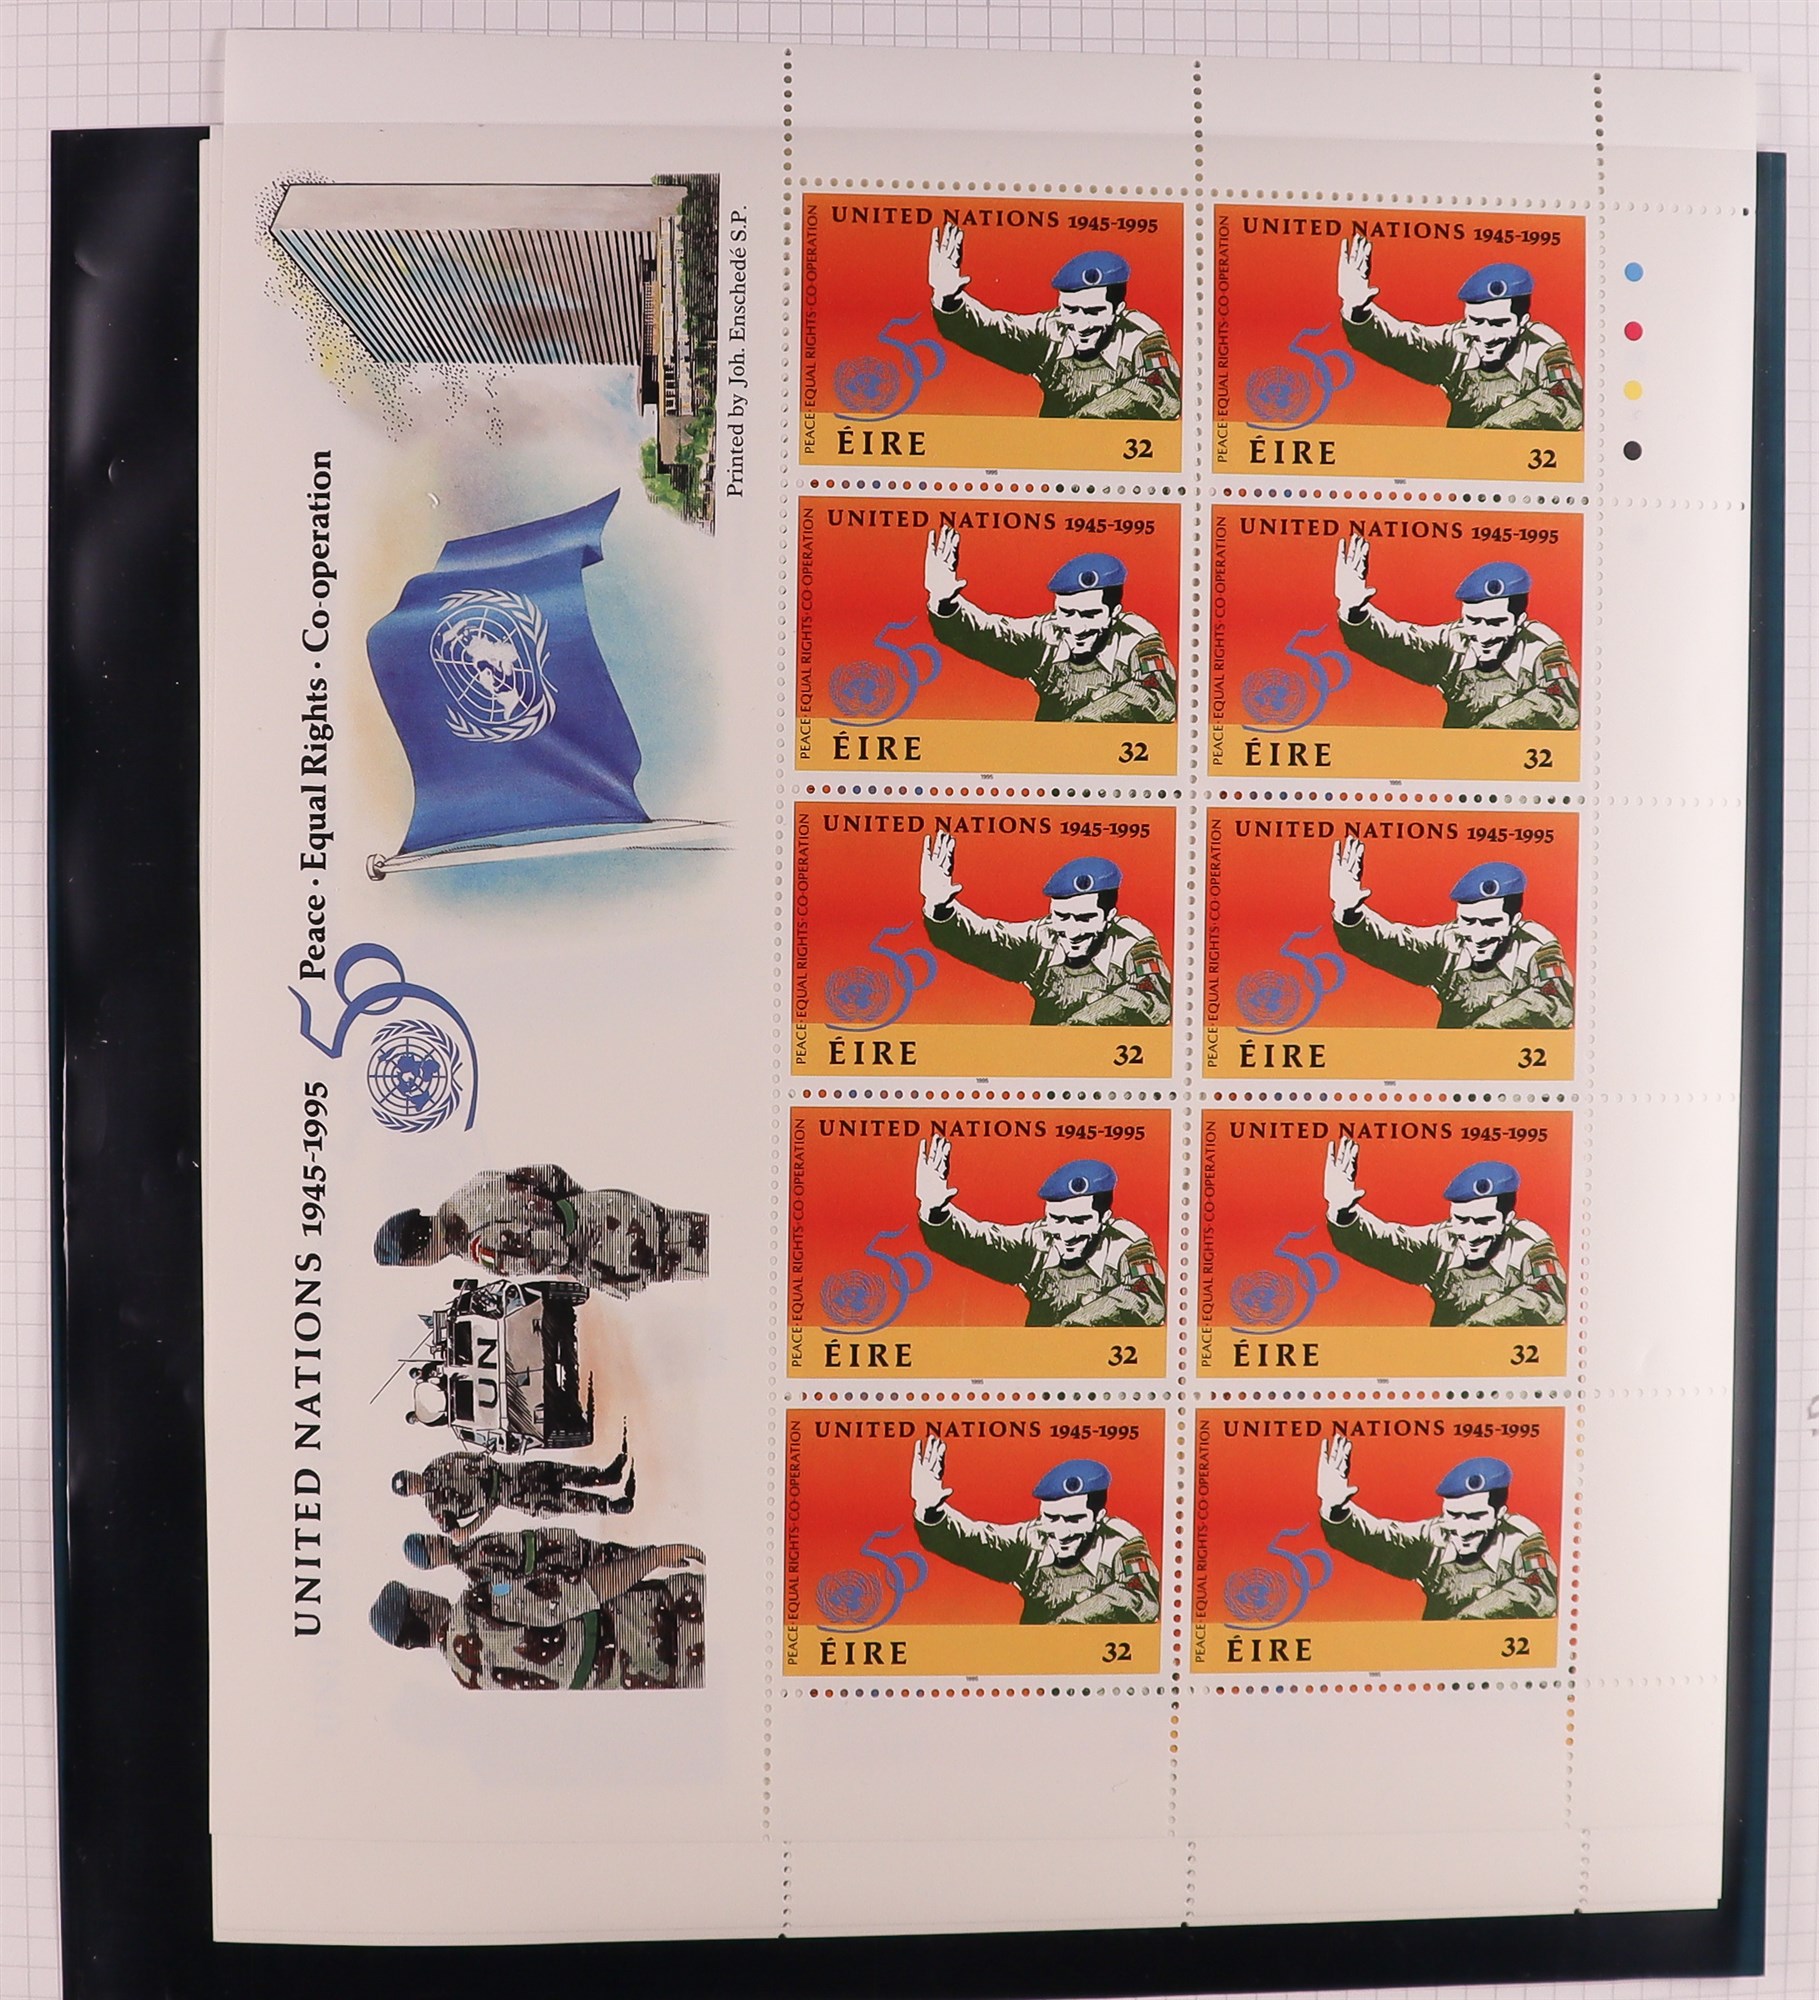 IRELAND 1988-2002 SHEETLETS NEVER HINGED MINT COLLECTION in album, stc 1,150 Euro. (85+ sheetlets)